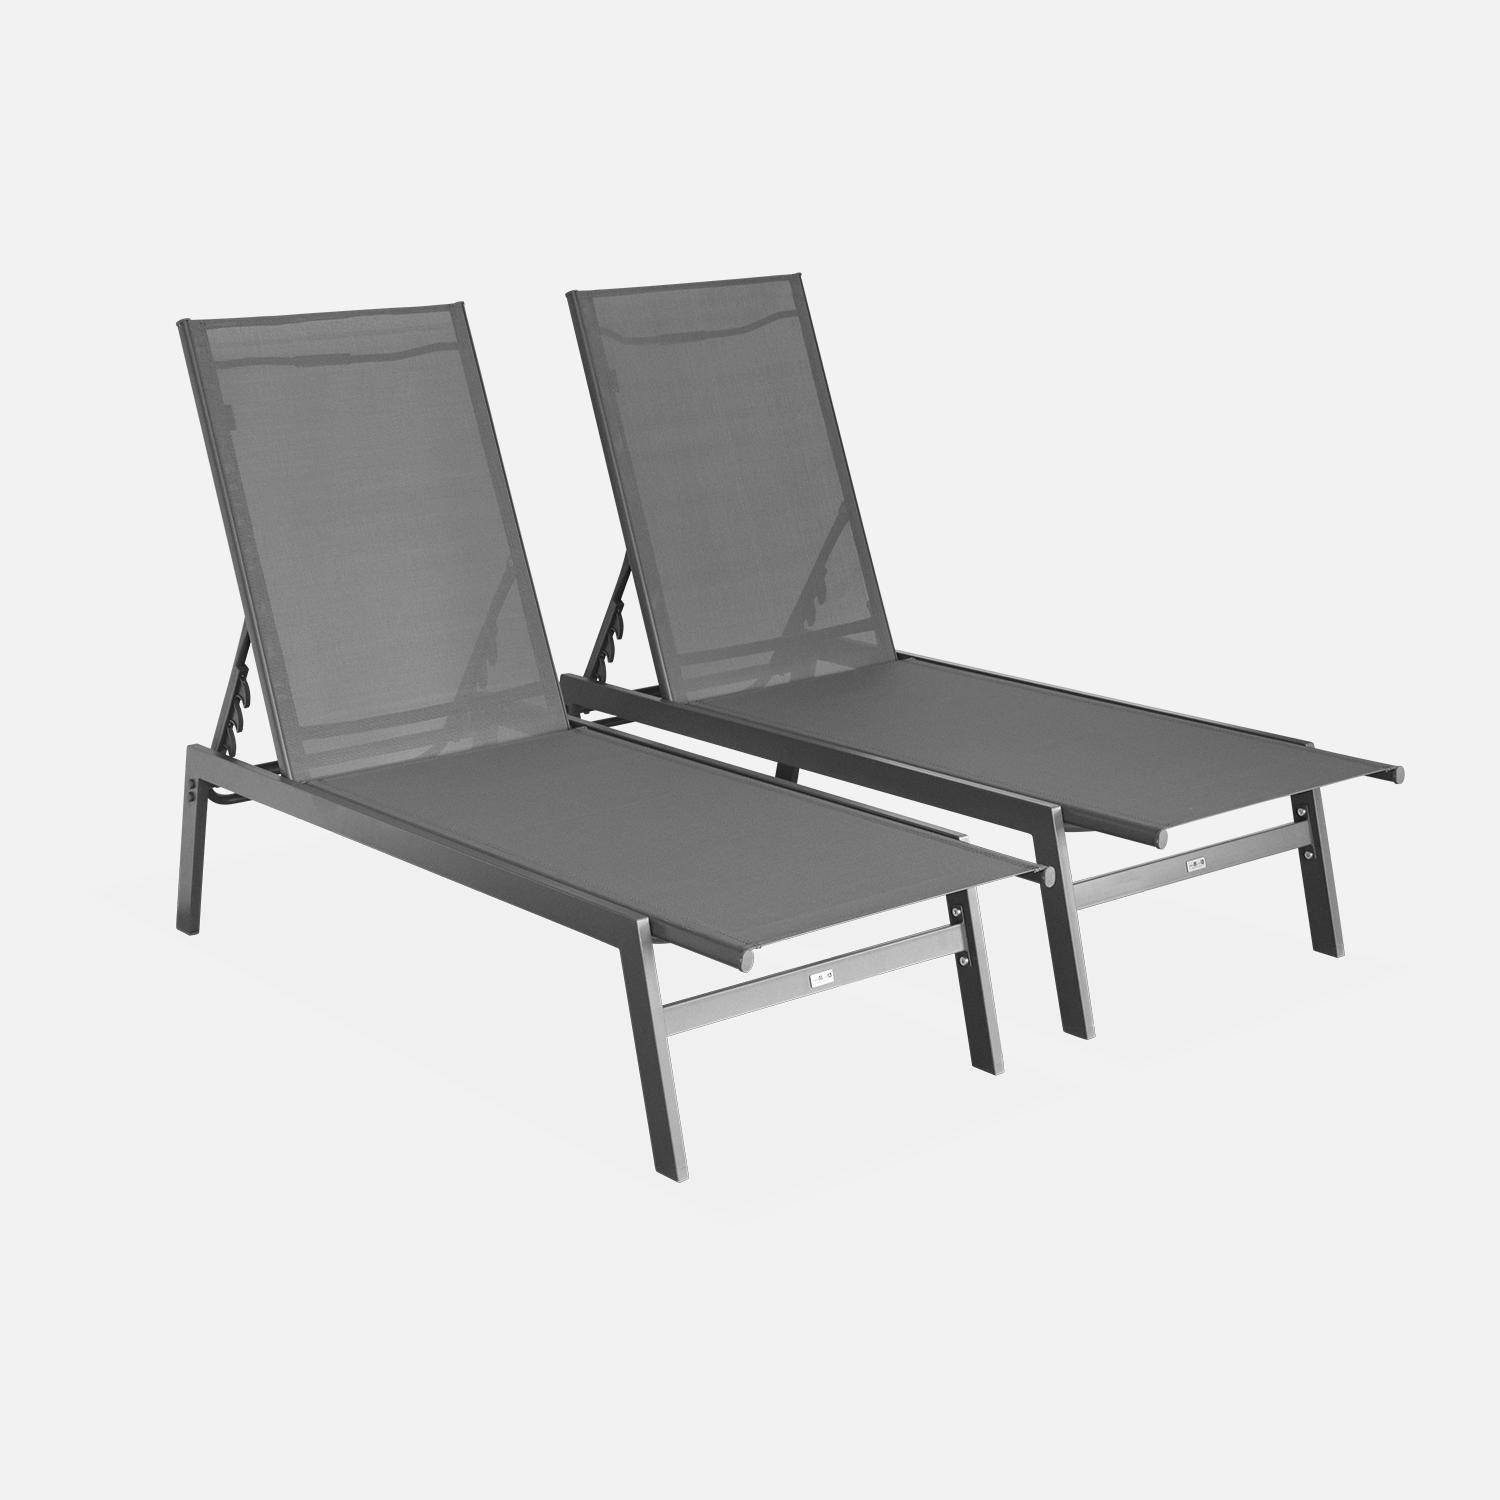 Pair of Textilene and Metal Multi-Position Sun Loungers, Anthracite Photo3